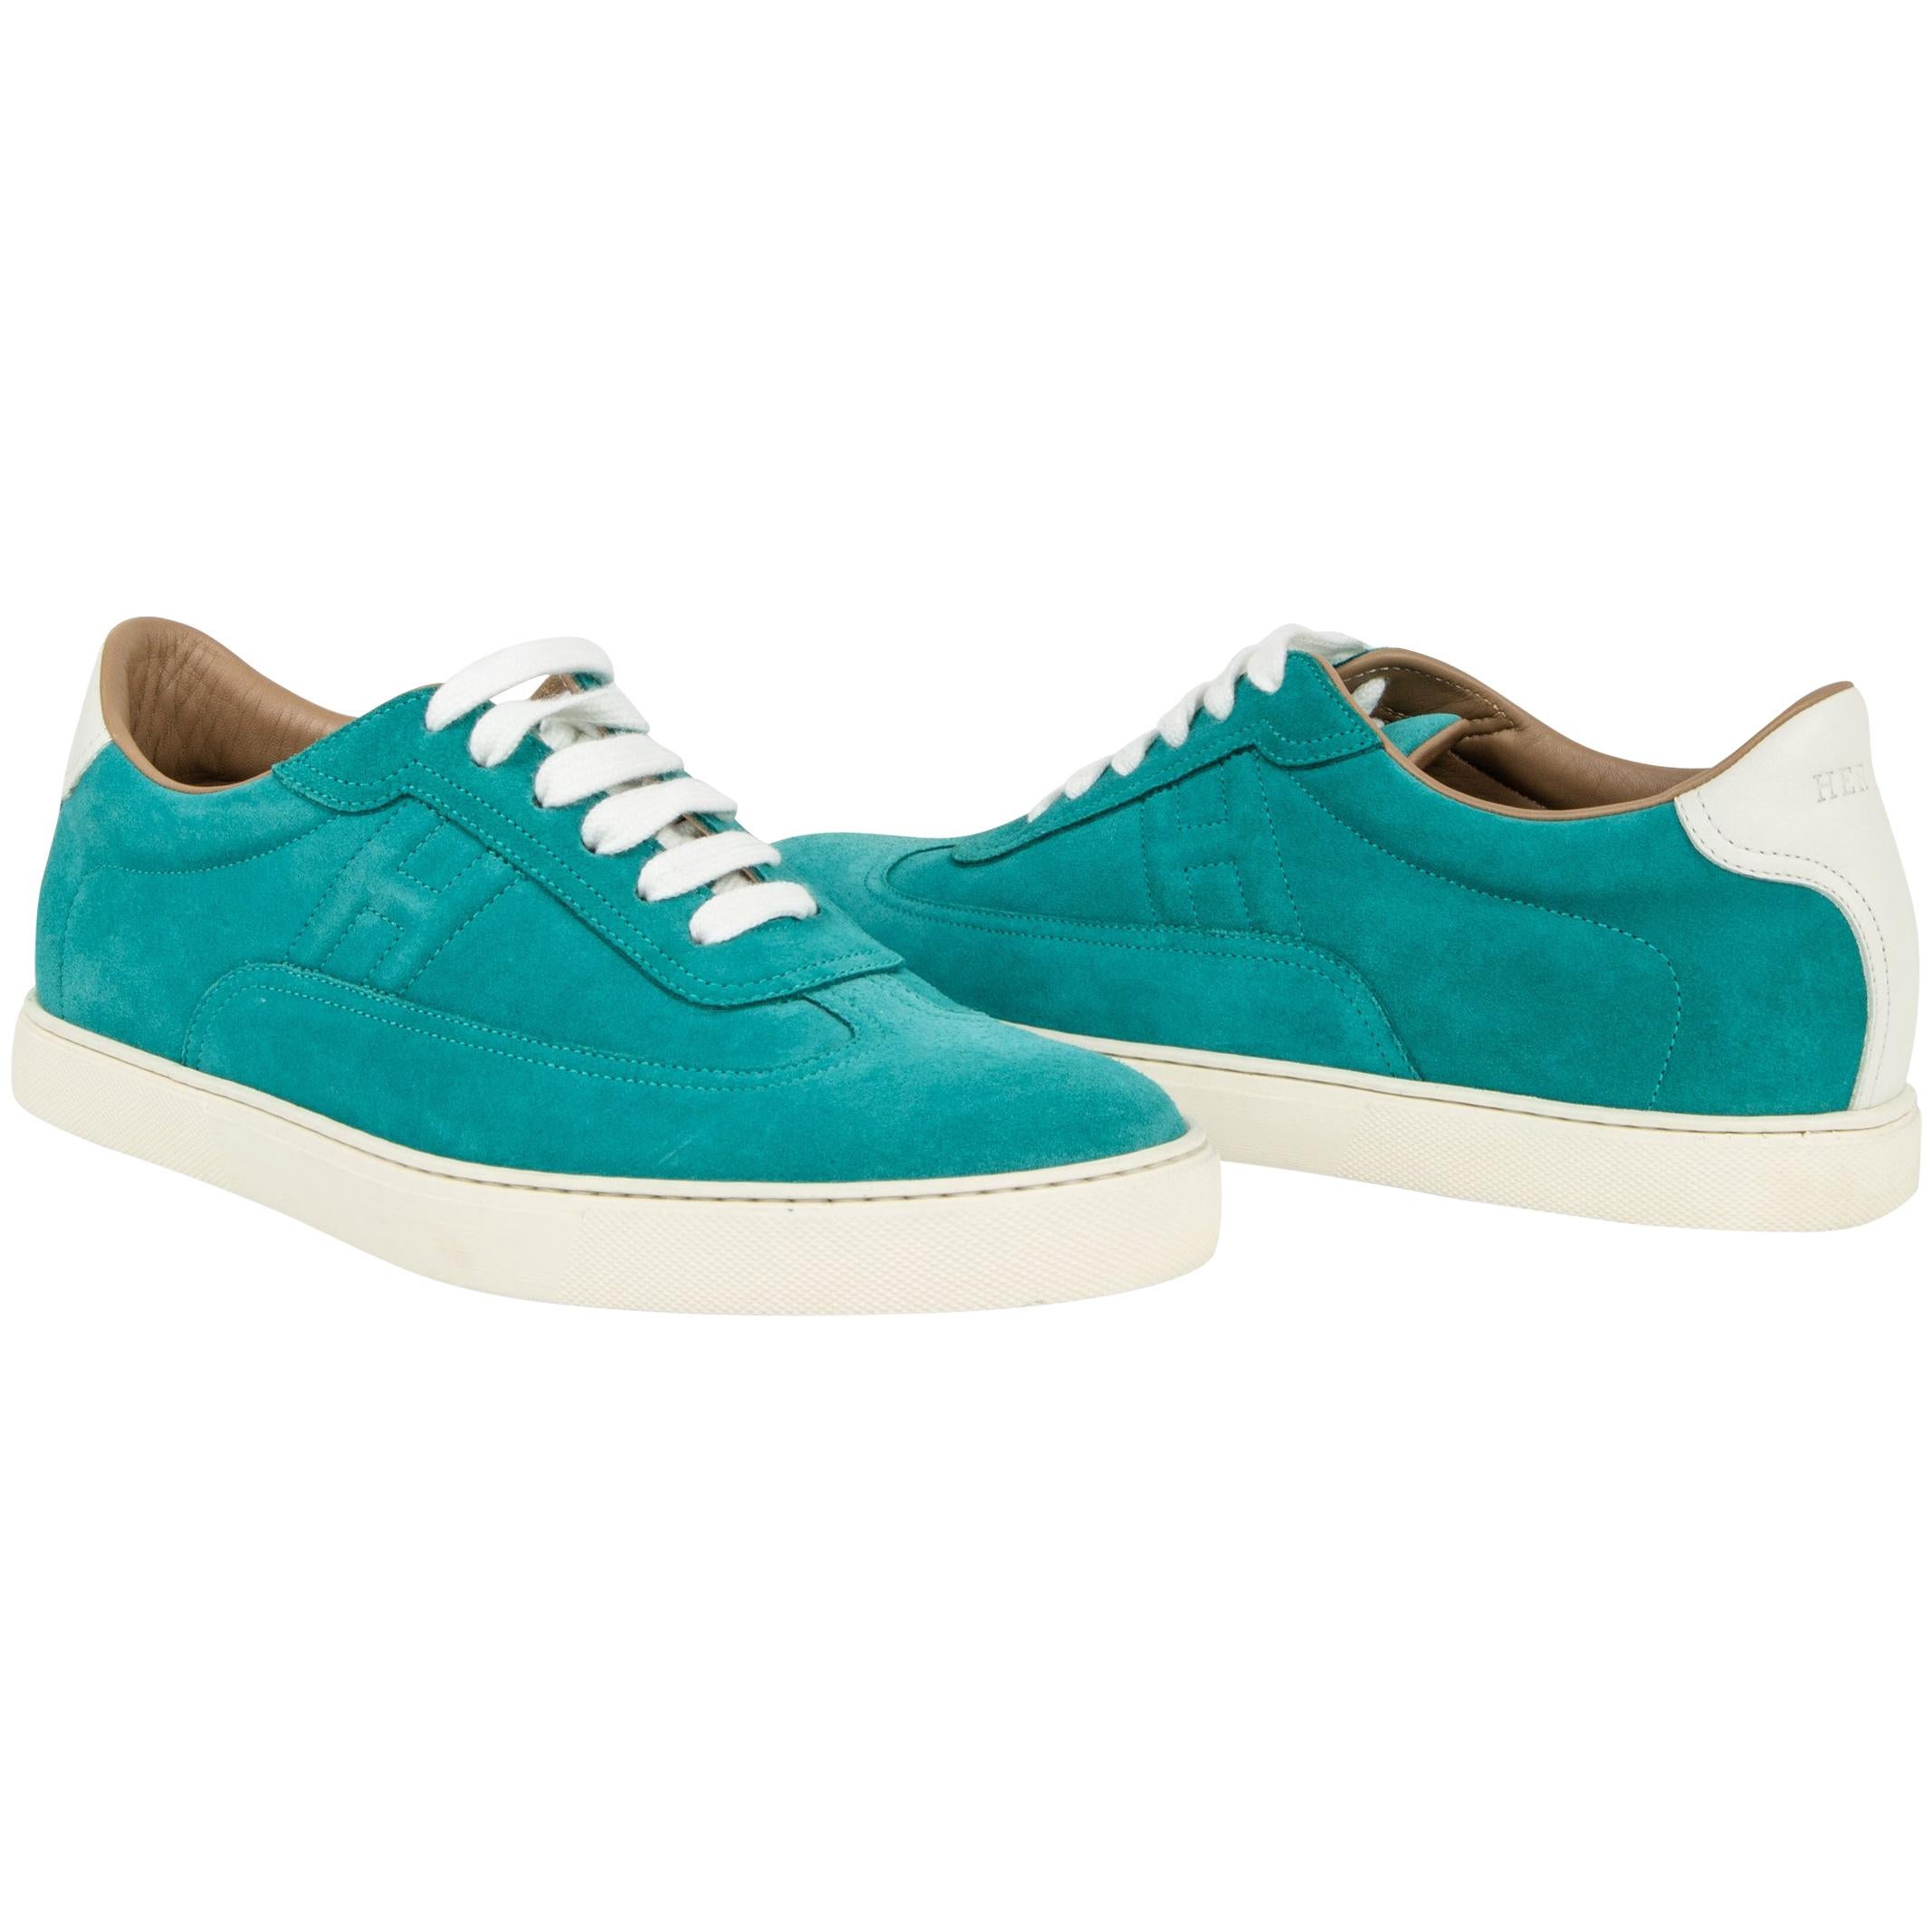 Hermes Shoe Men's Sneaker Blue Paon and White Suede  42.5